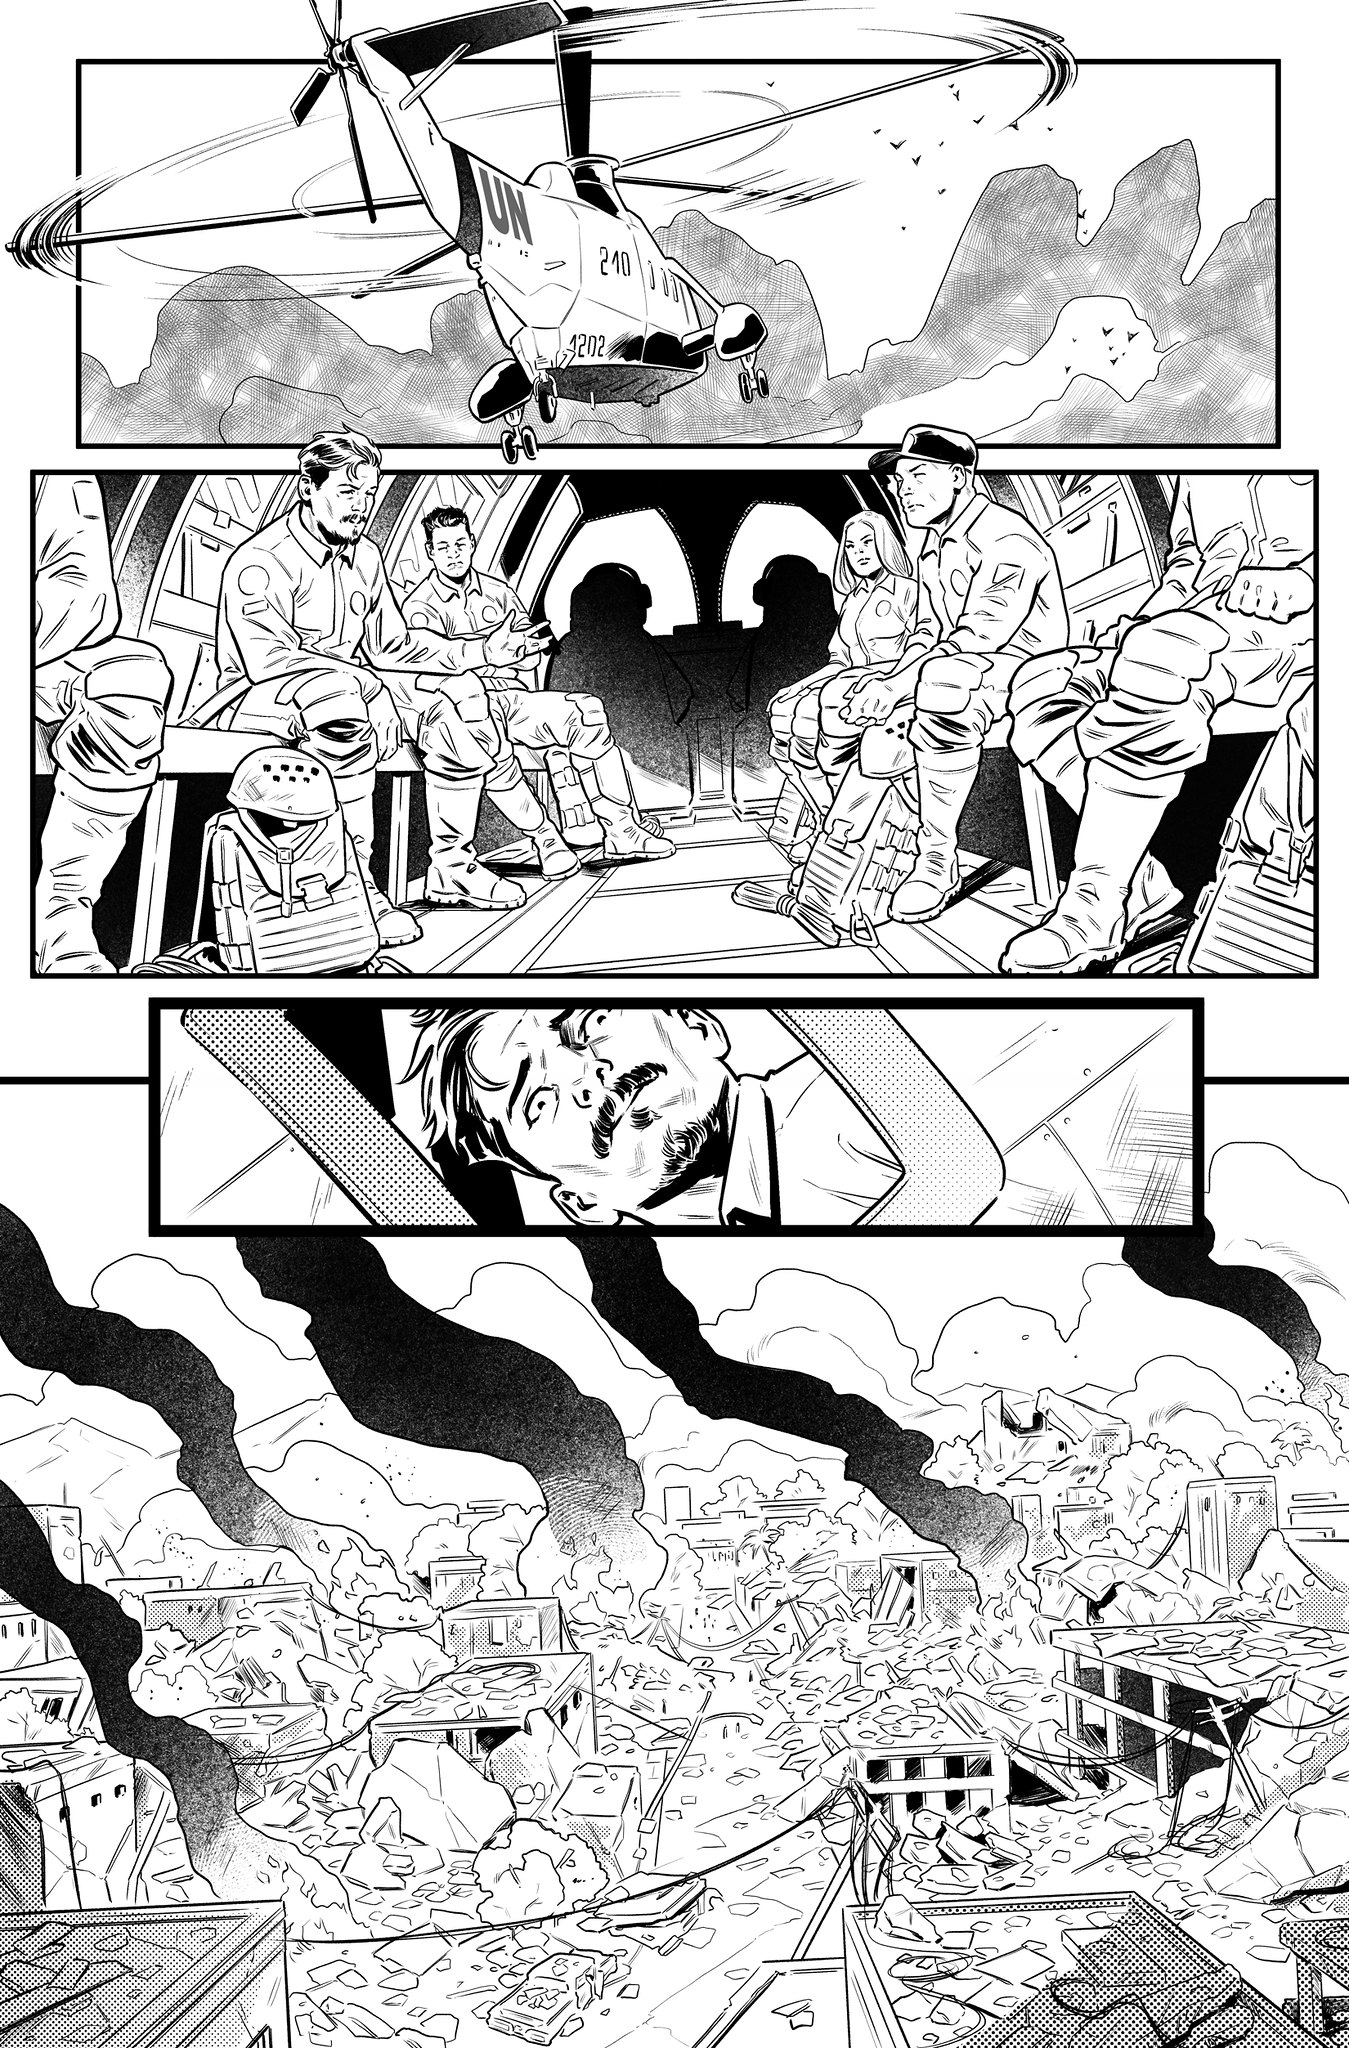 SURVIVAL#1_PAGE1_INKS